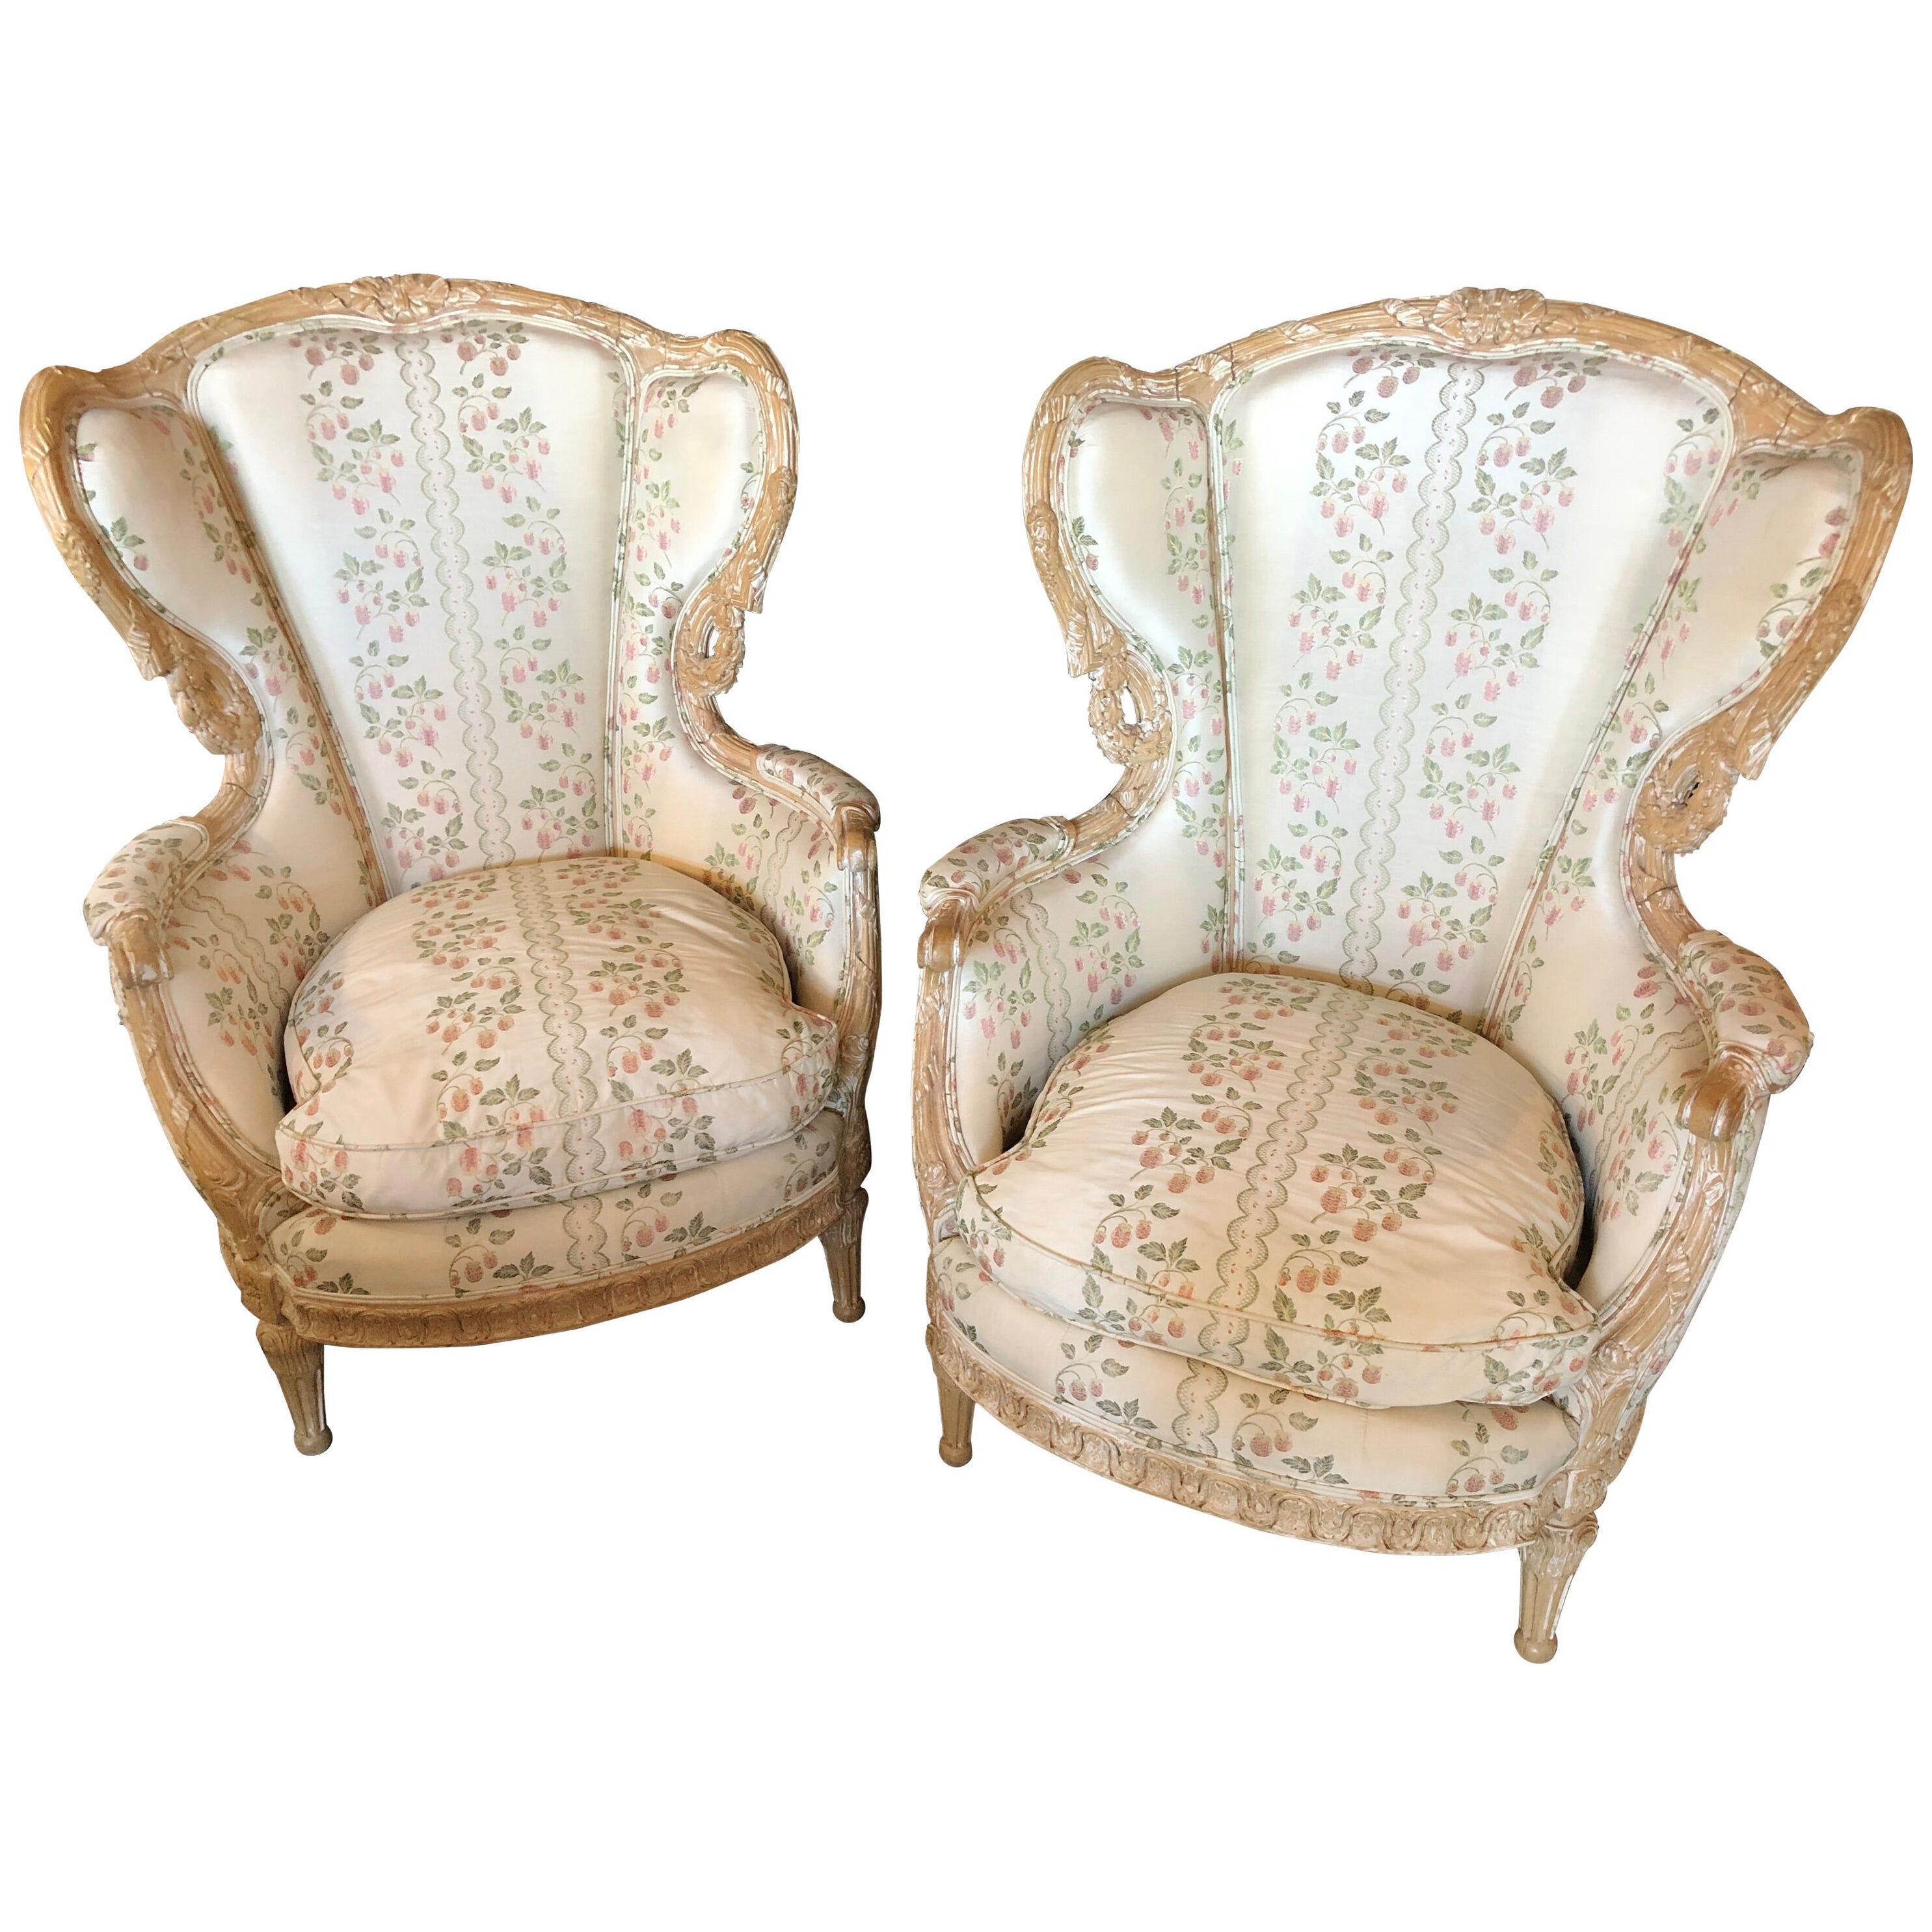 Pair of Large Impressive High Back Distressed Carved Framed Wing Back Armchairs	